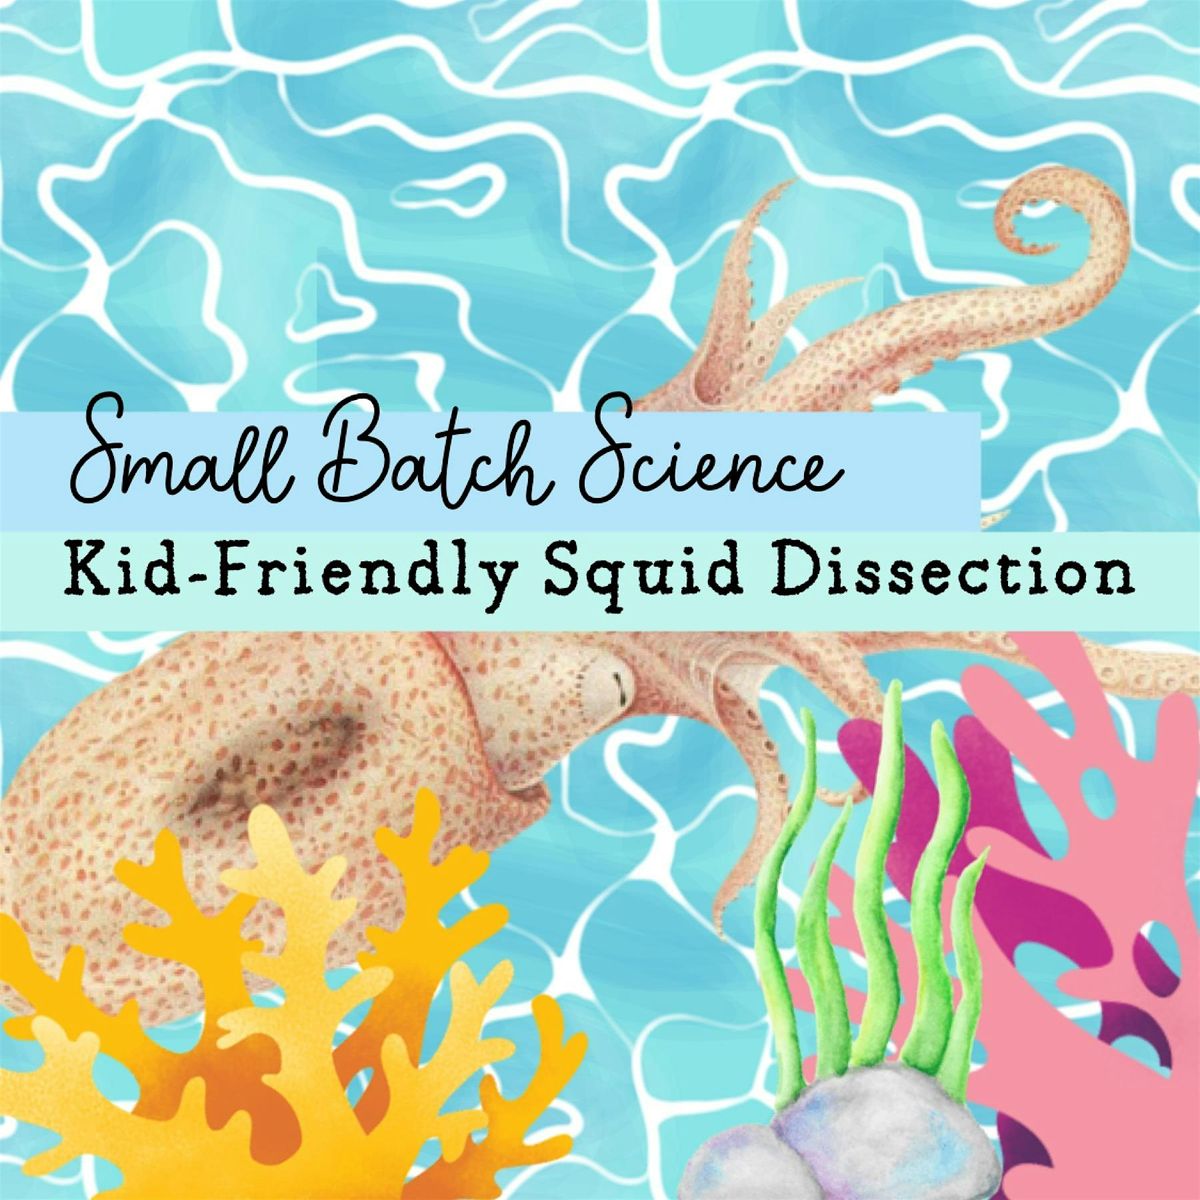 Small Batch Science: Kid-Friendly Squid Dissection